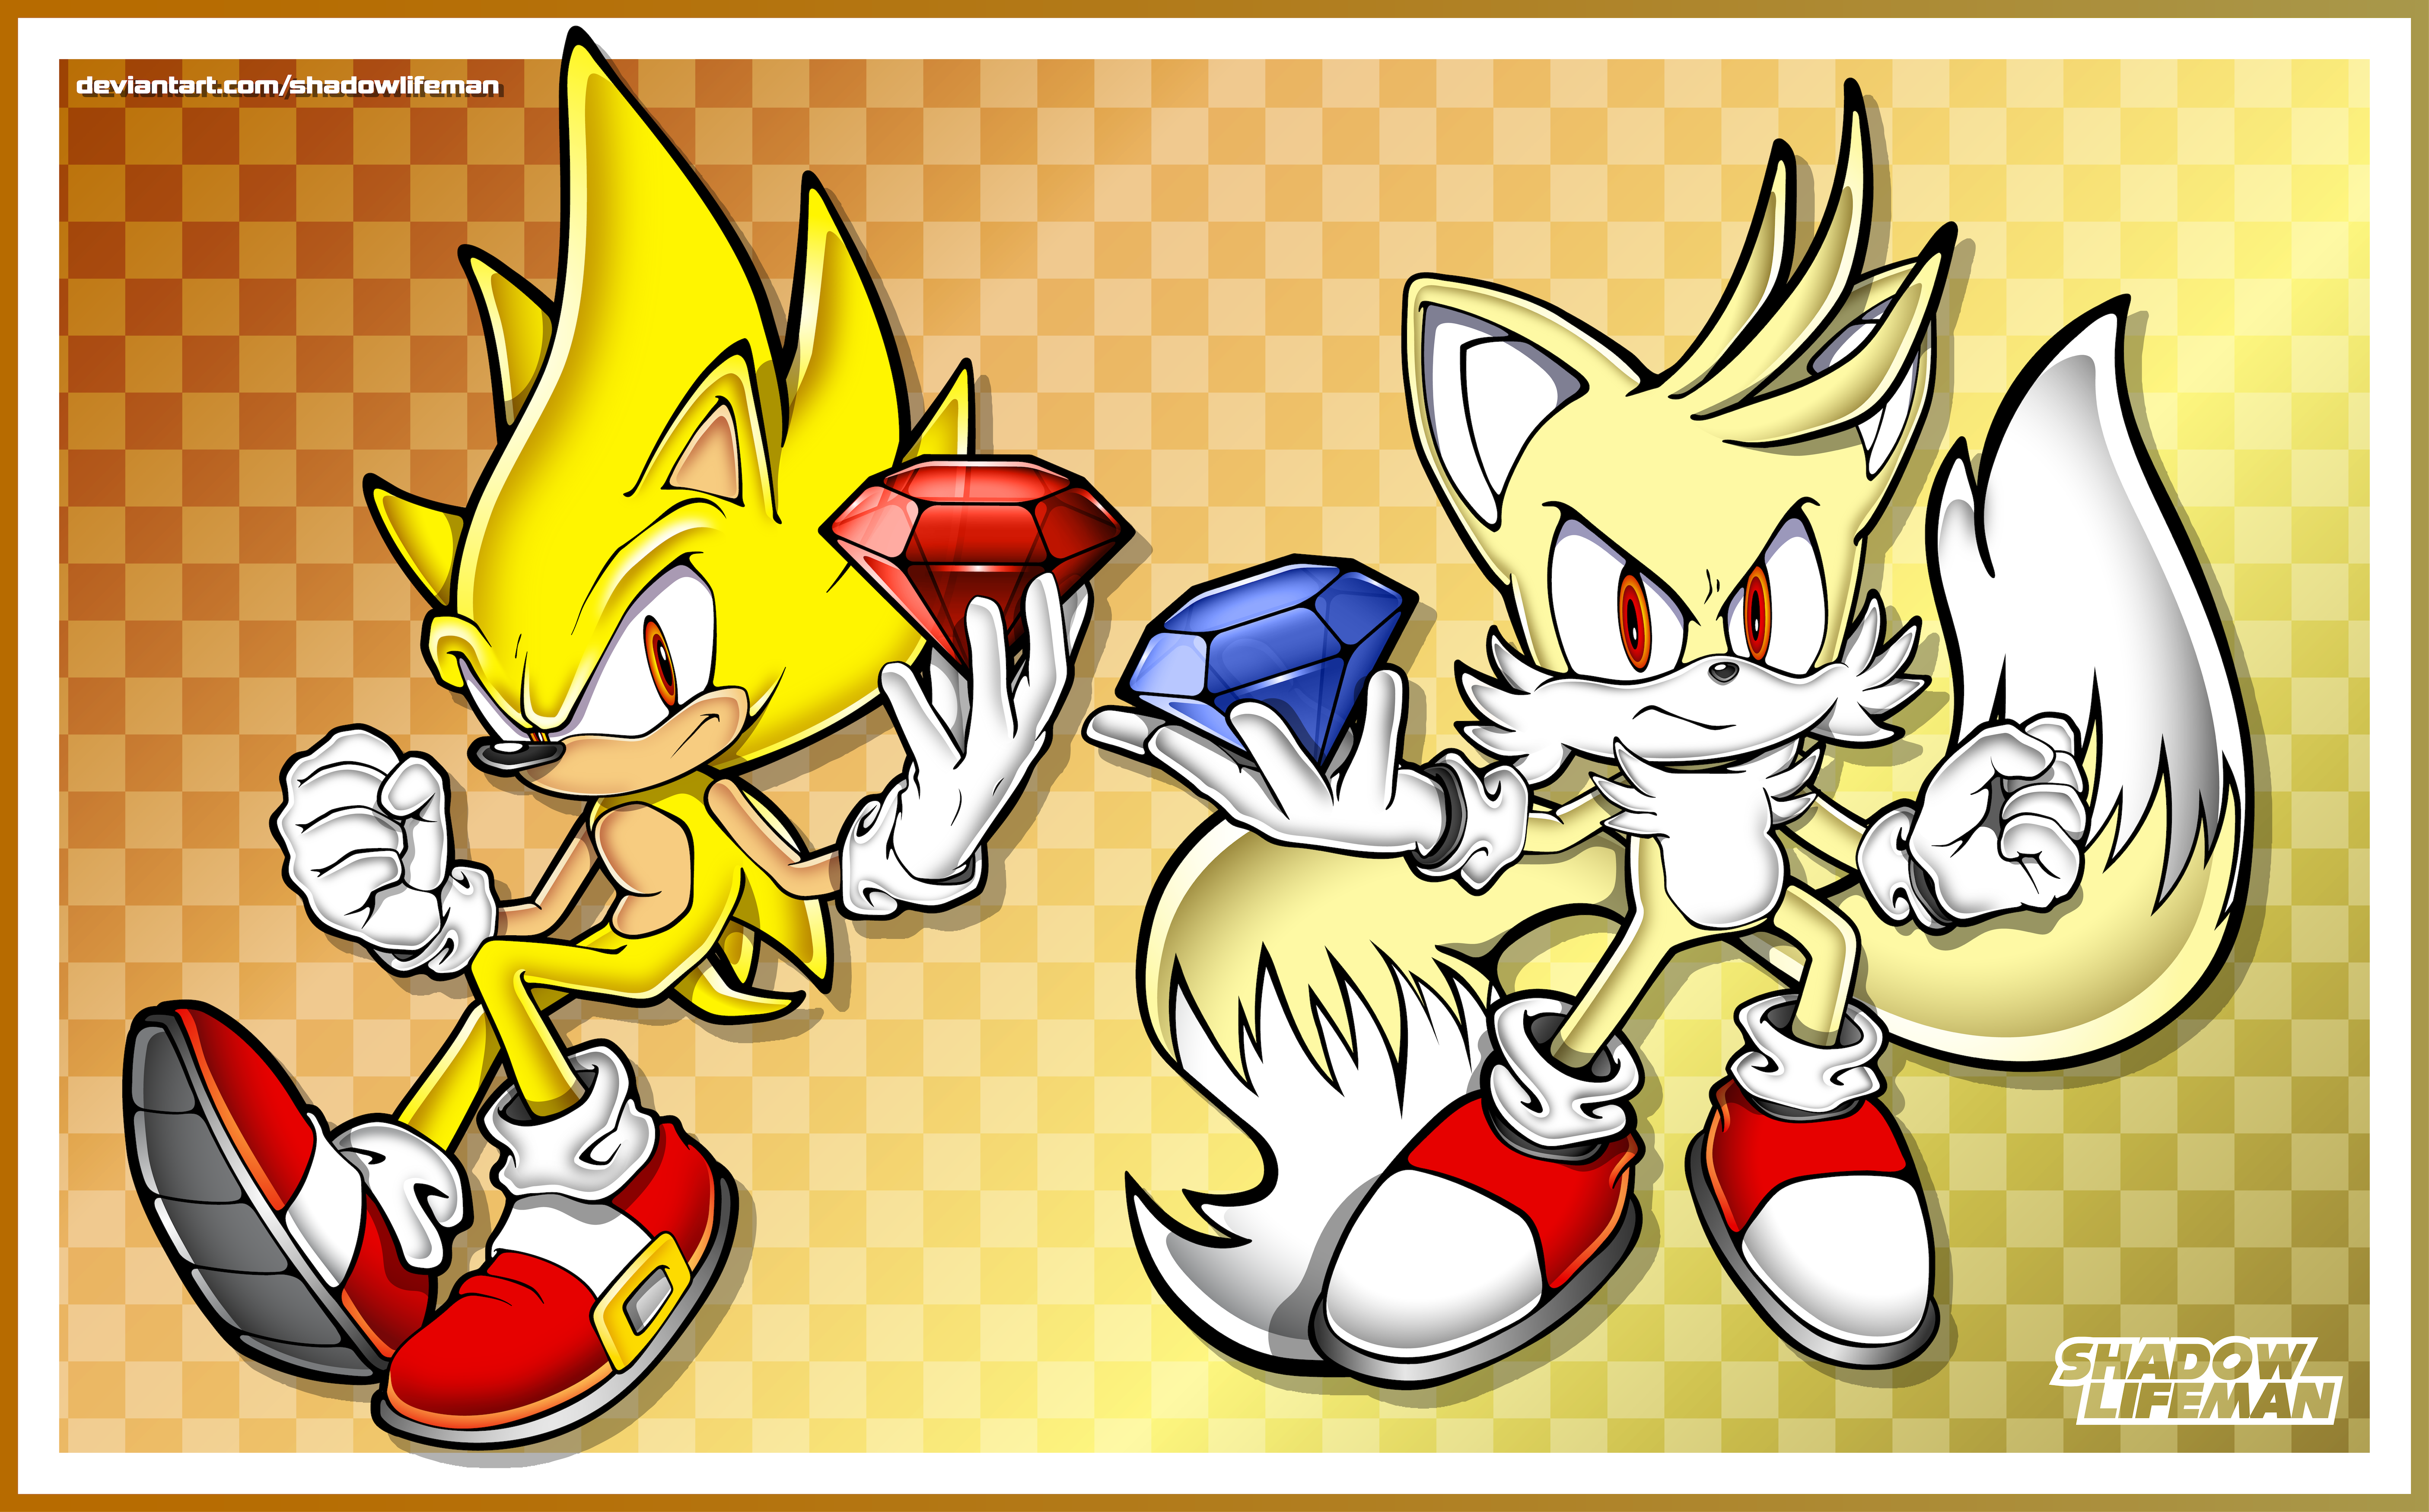 Super Sonic and Super Tails saving the day! (Artist: JJsmiley95